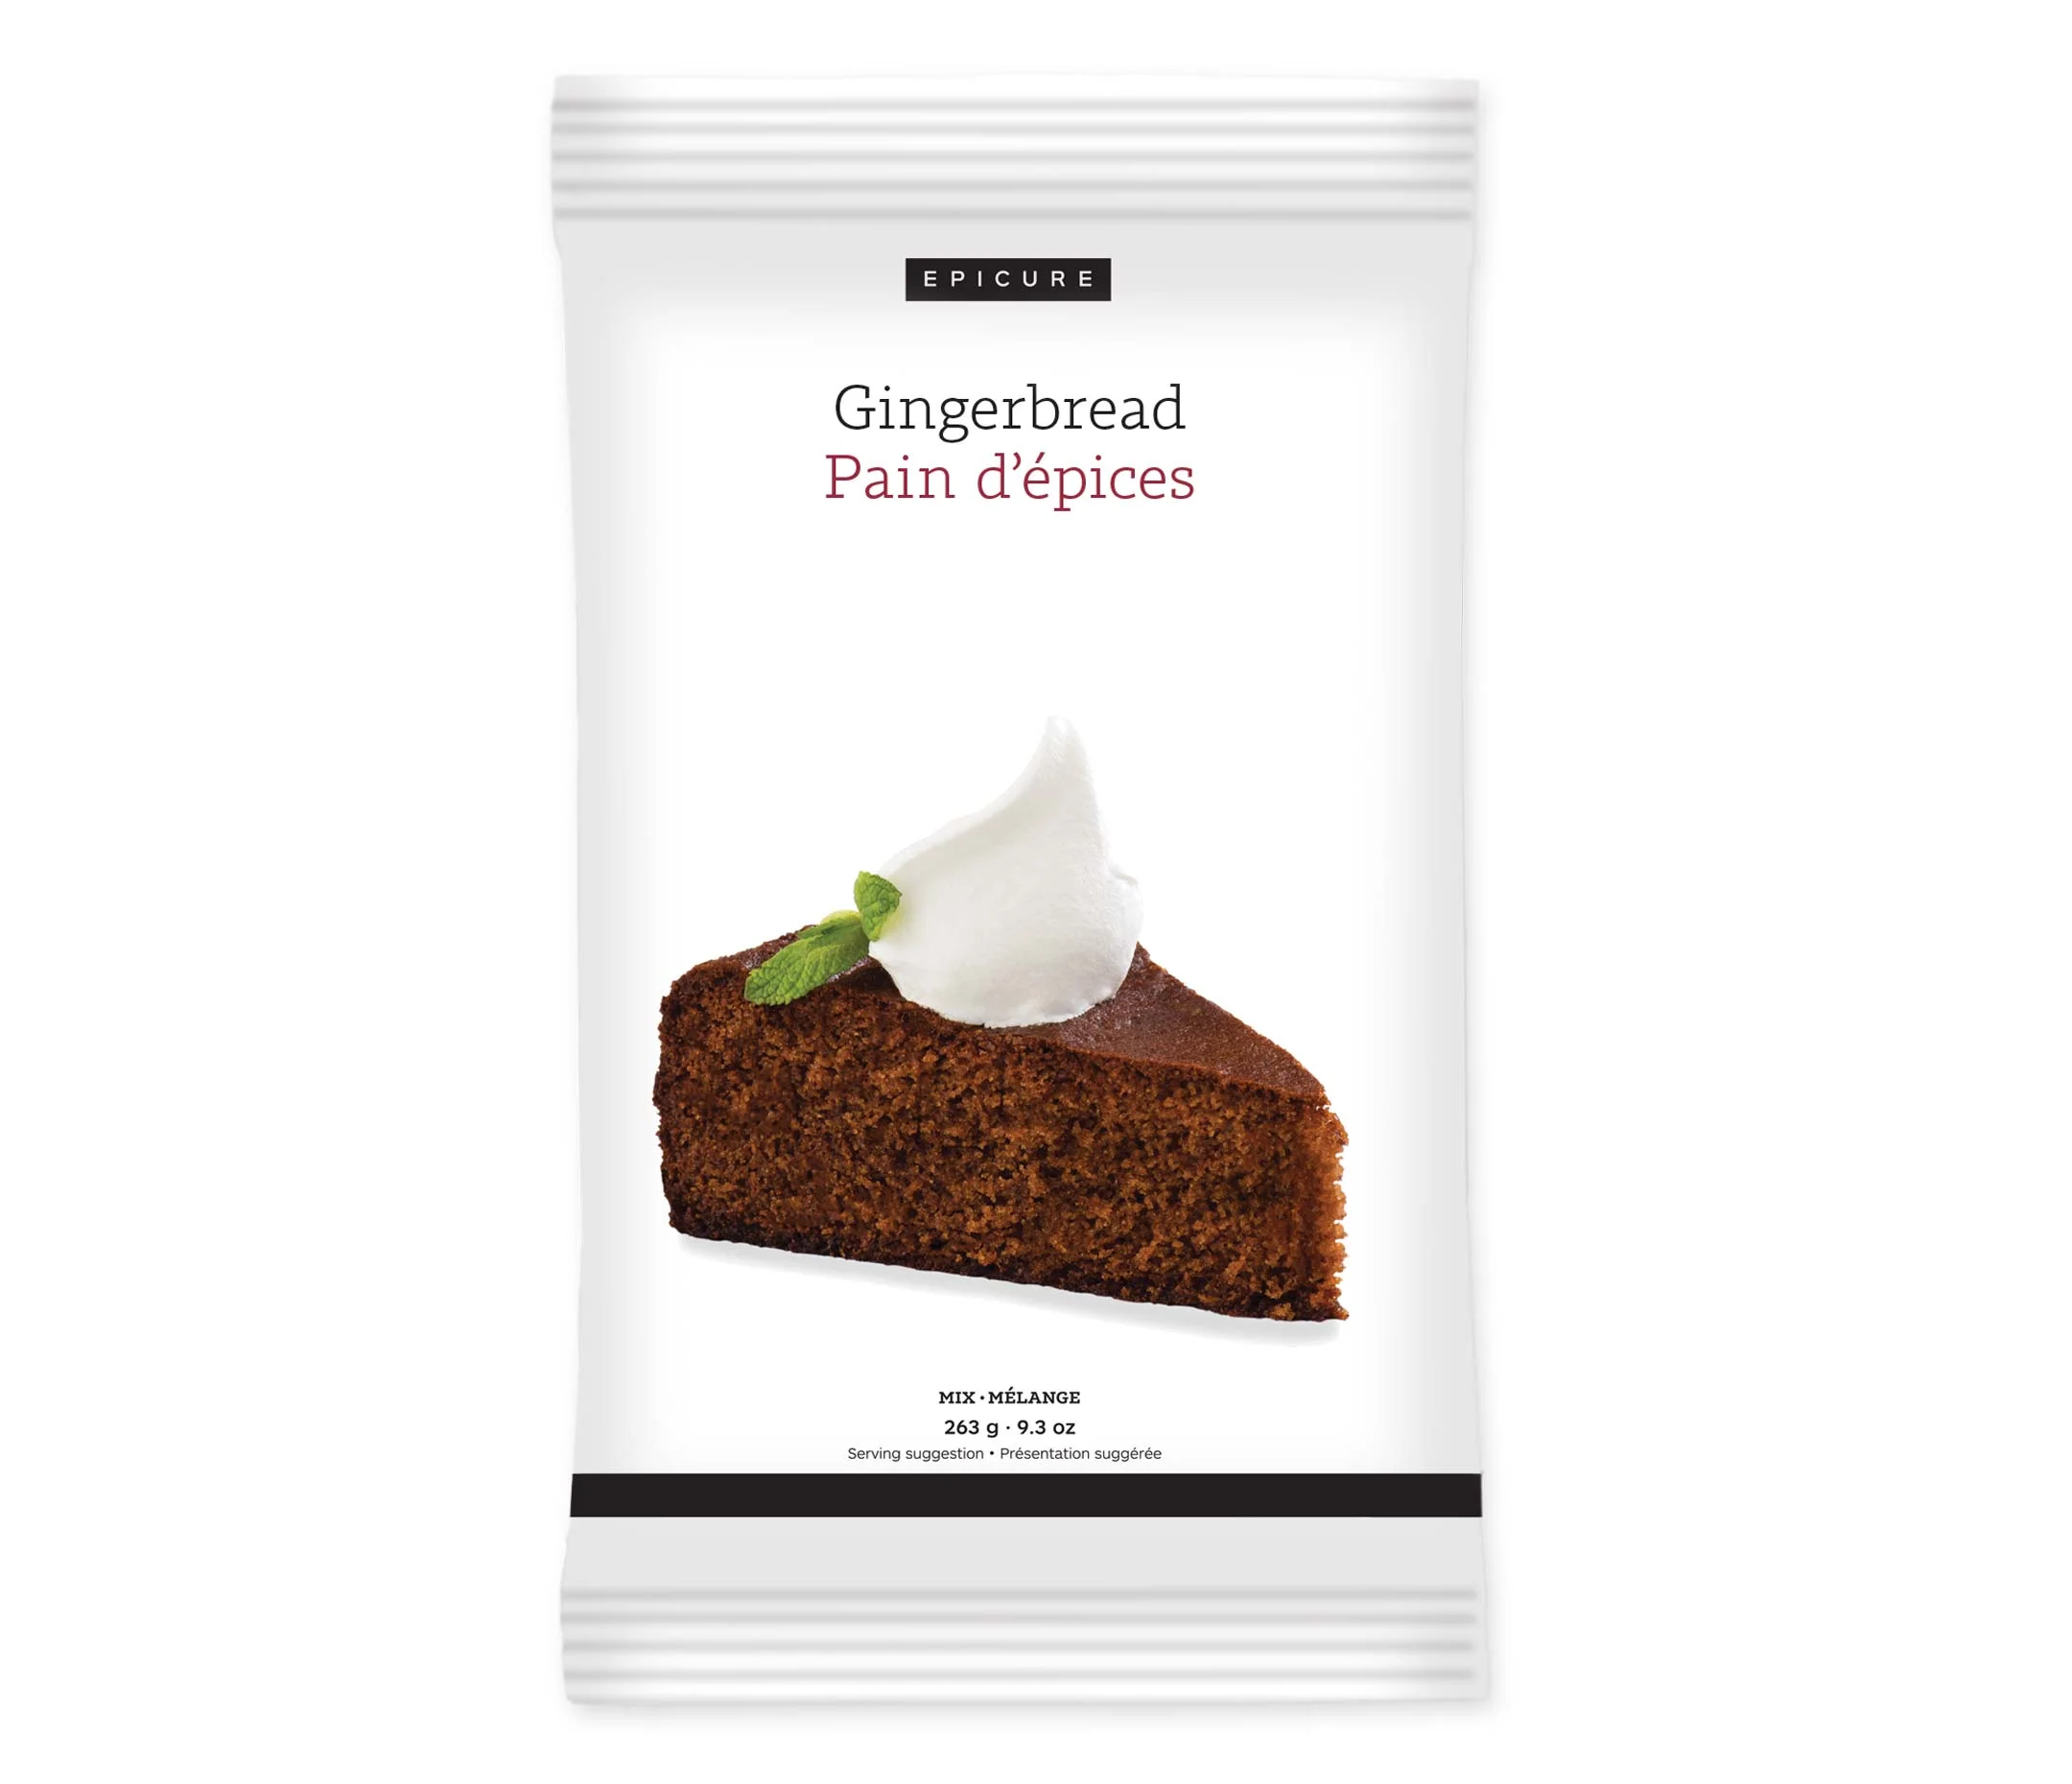 Gingerbread Mix (Pack of 2)